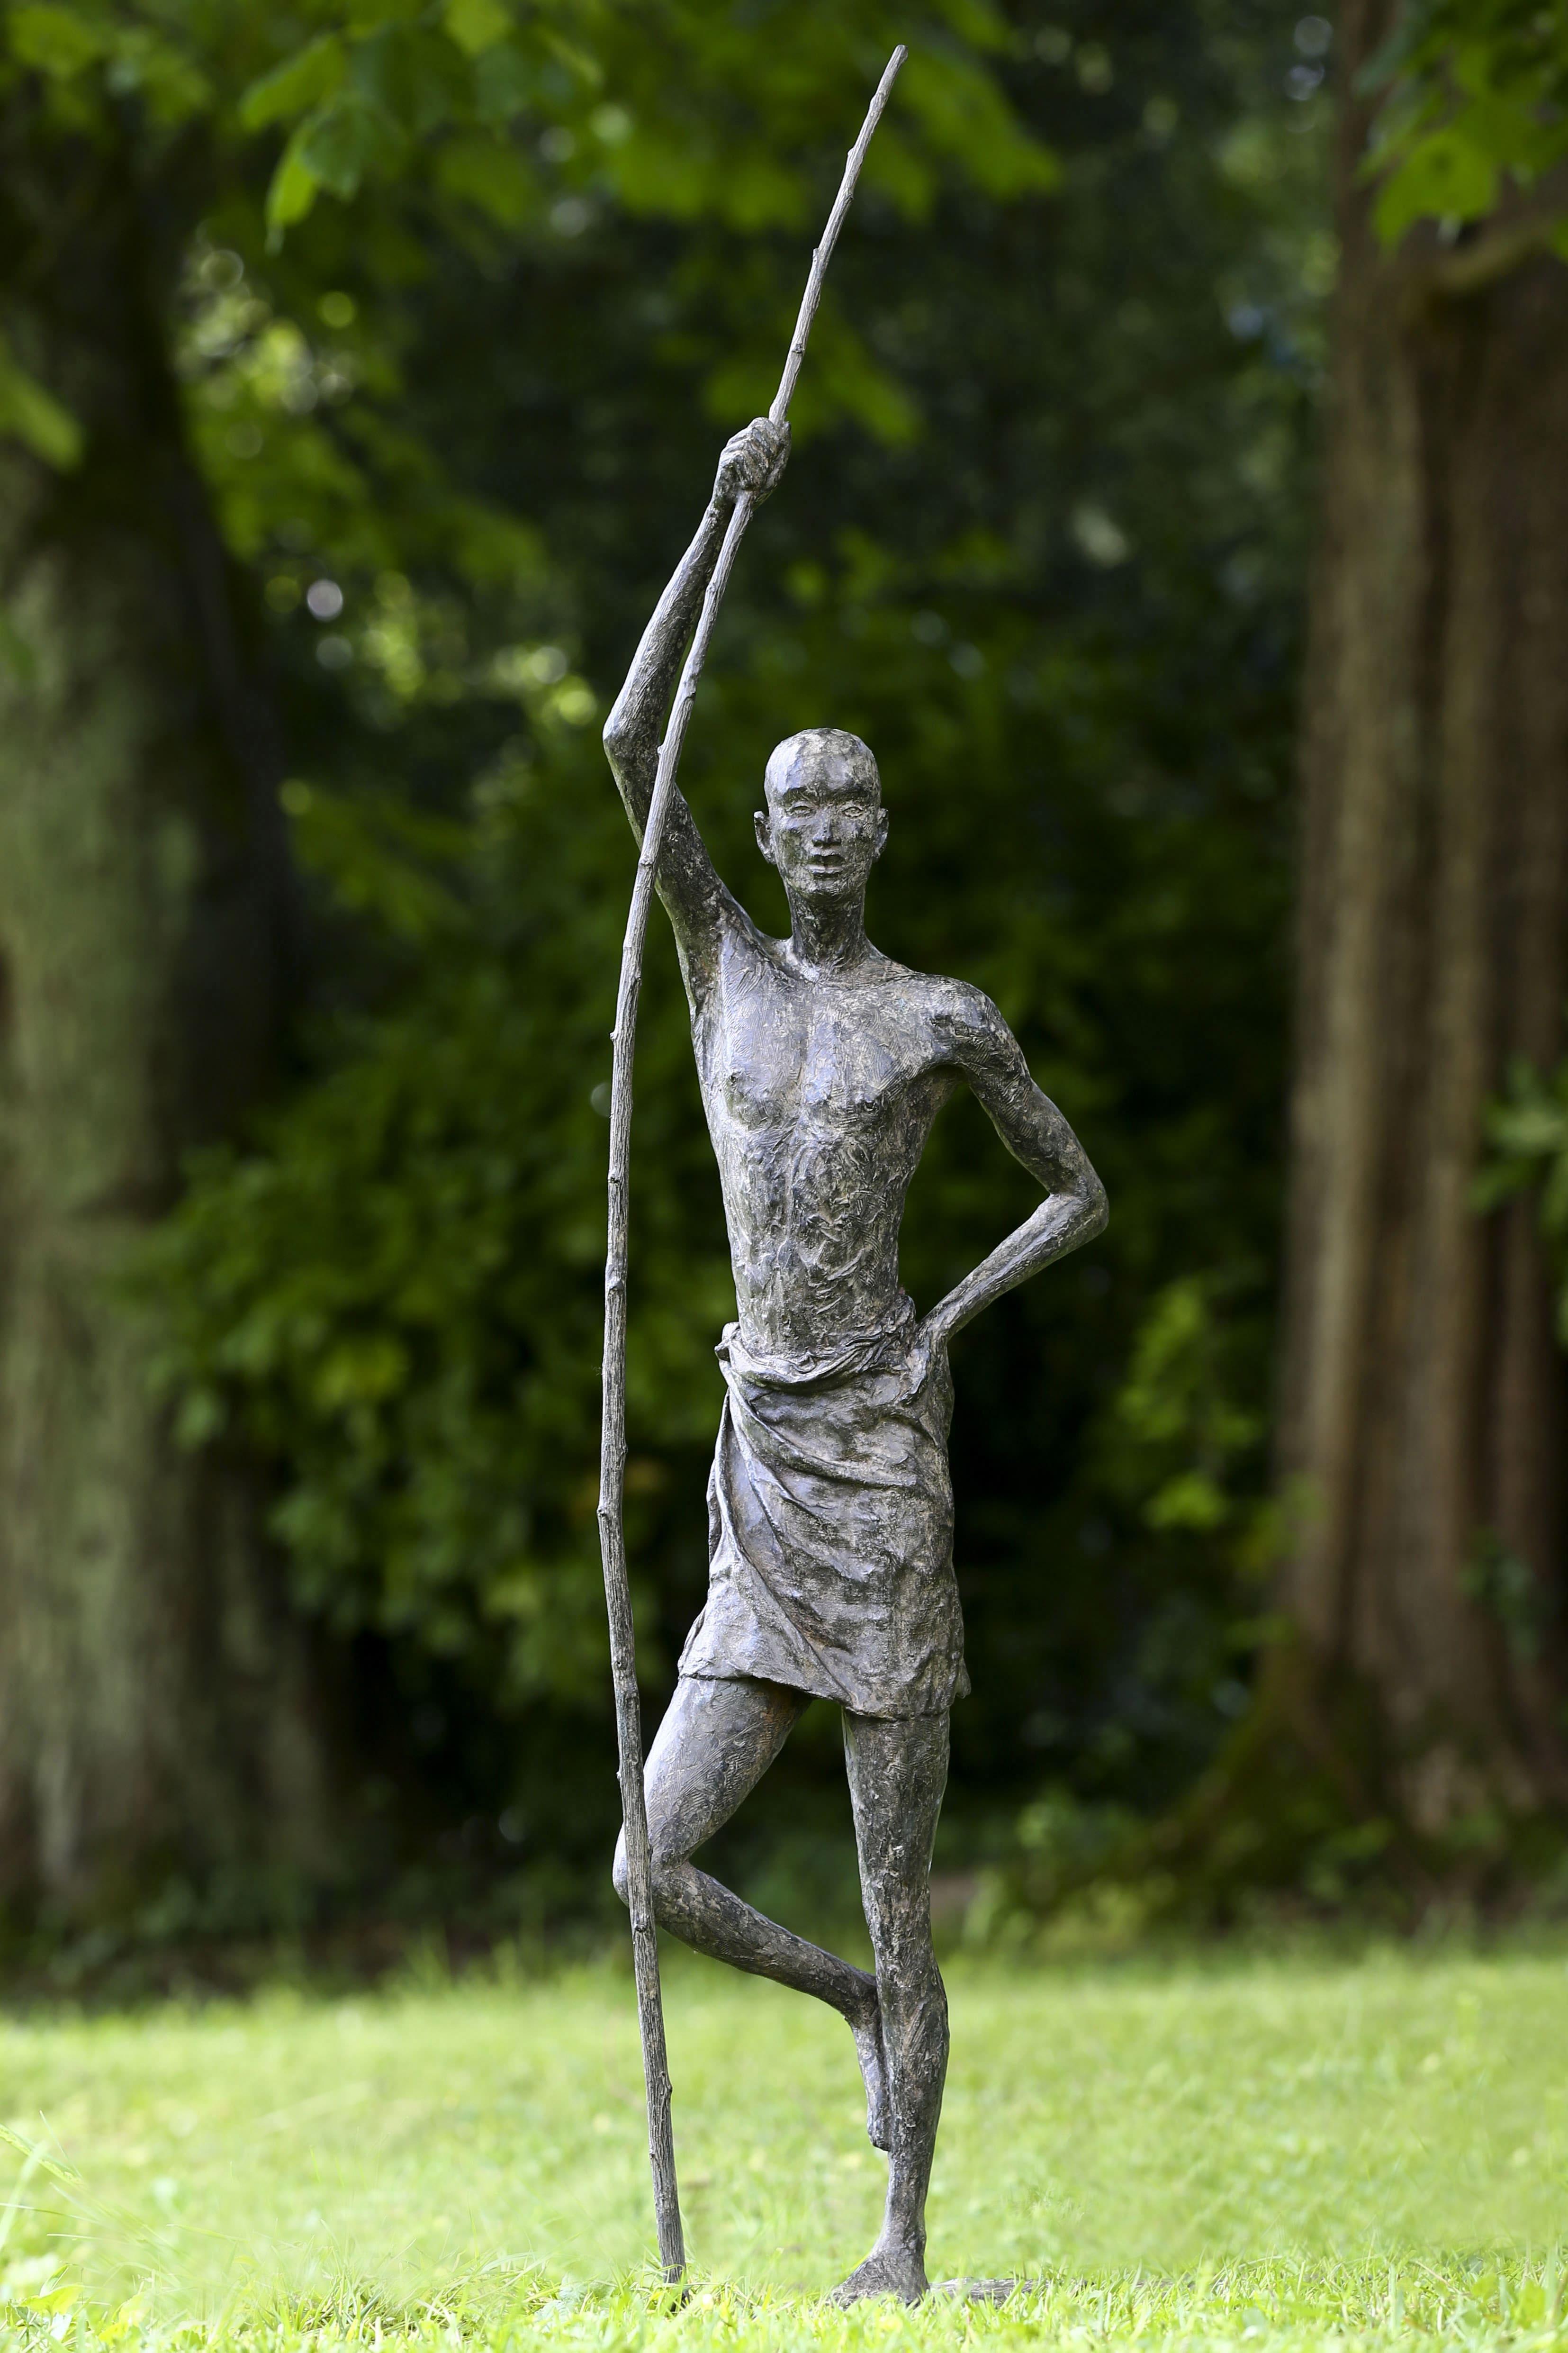 Between Sky and Earth - Sculpture of a standing man